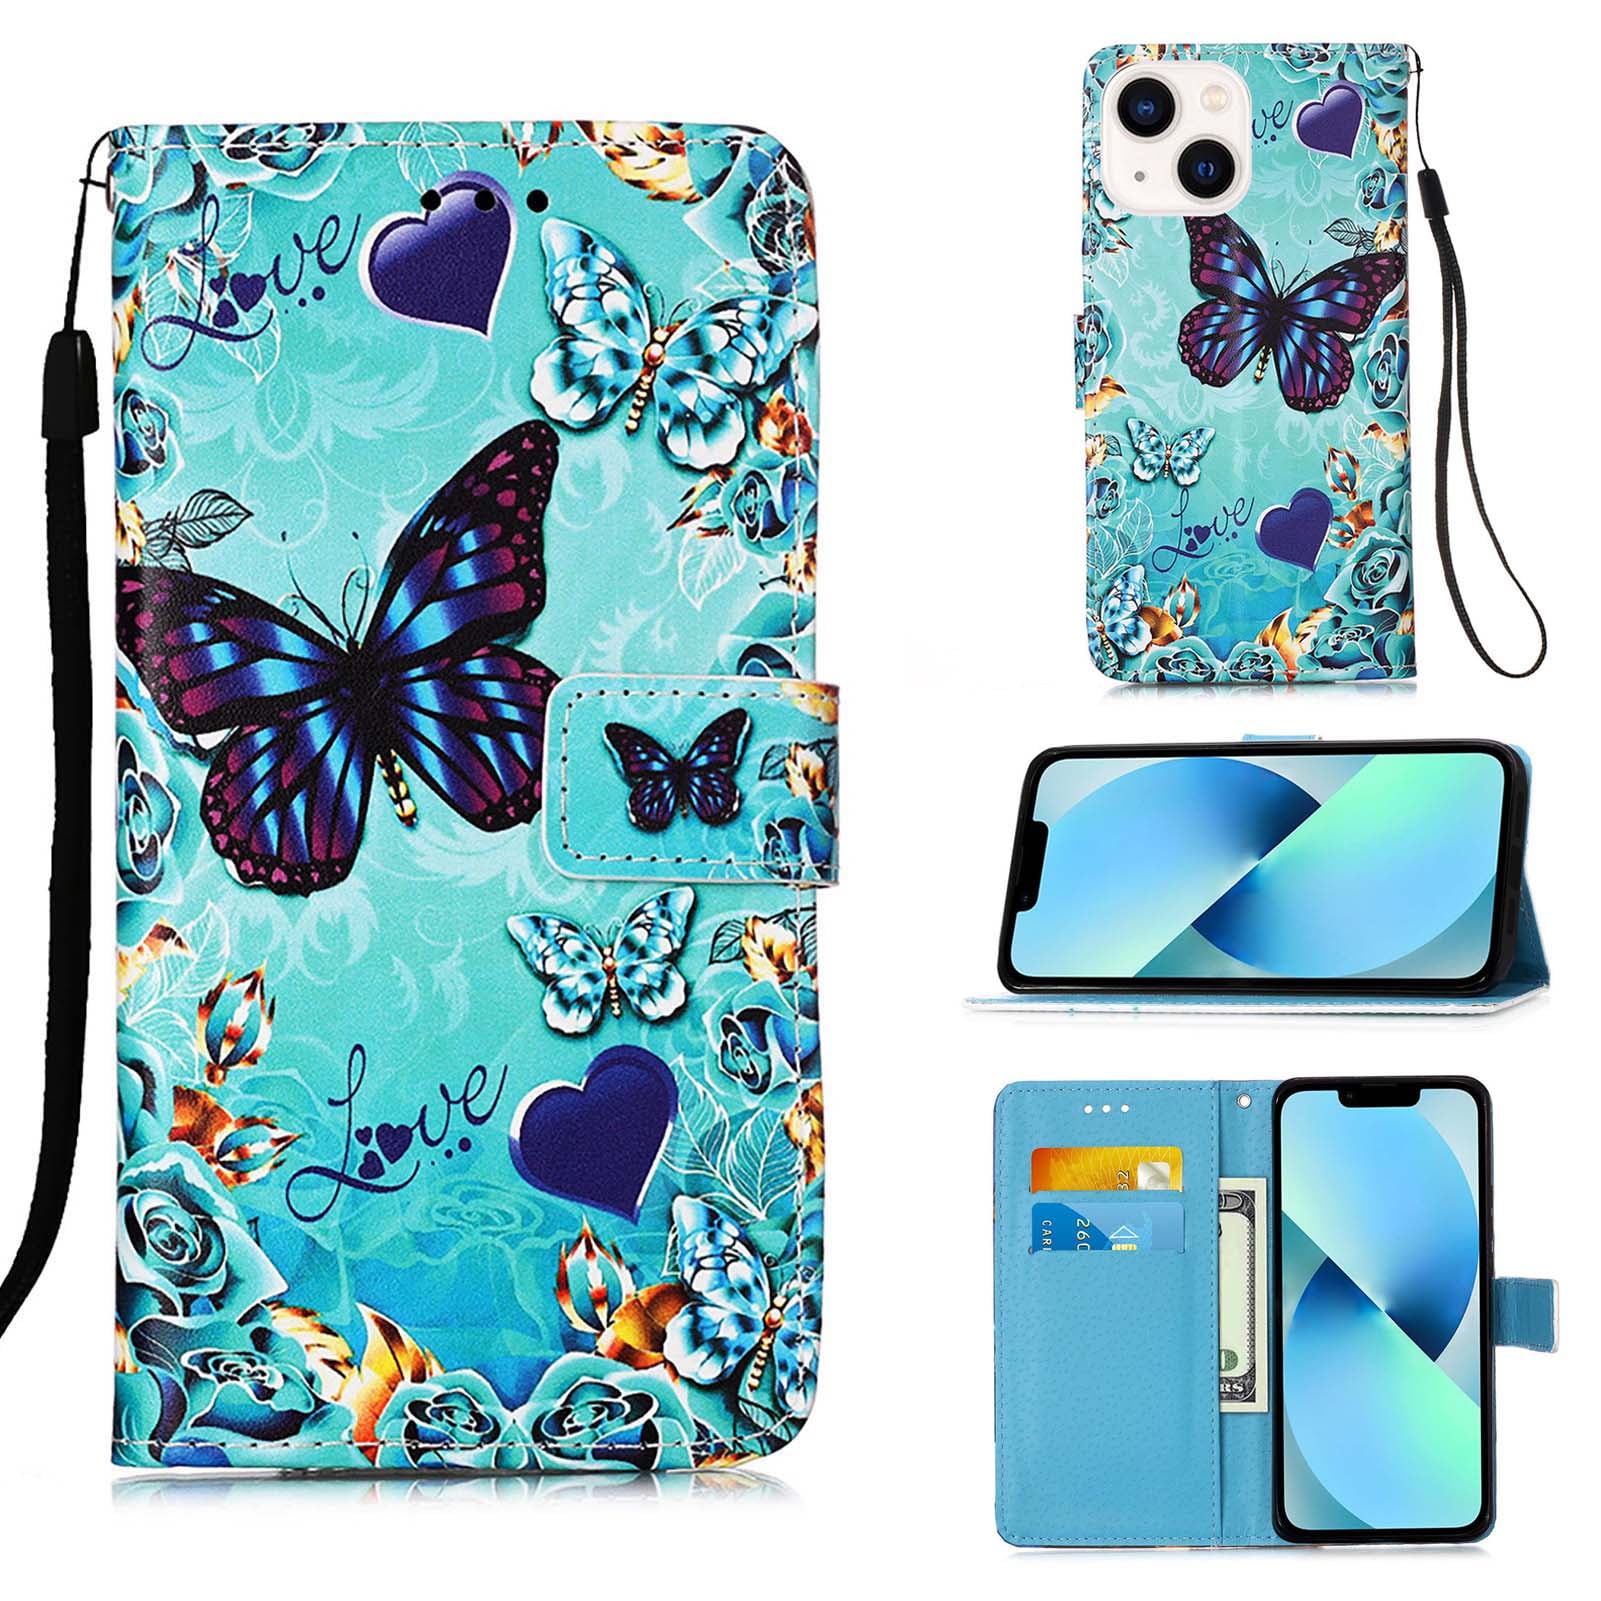 Case for iPhone 6/iPhone 6S/iPhone 7/iPhone 8 Flip Case Cover Beautiful Paint Pattern illustration Premium PU Leather Protective Wallet Case with Folding Stand and Card Slots,for iPhone 6/6S/7/8,Kiss 